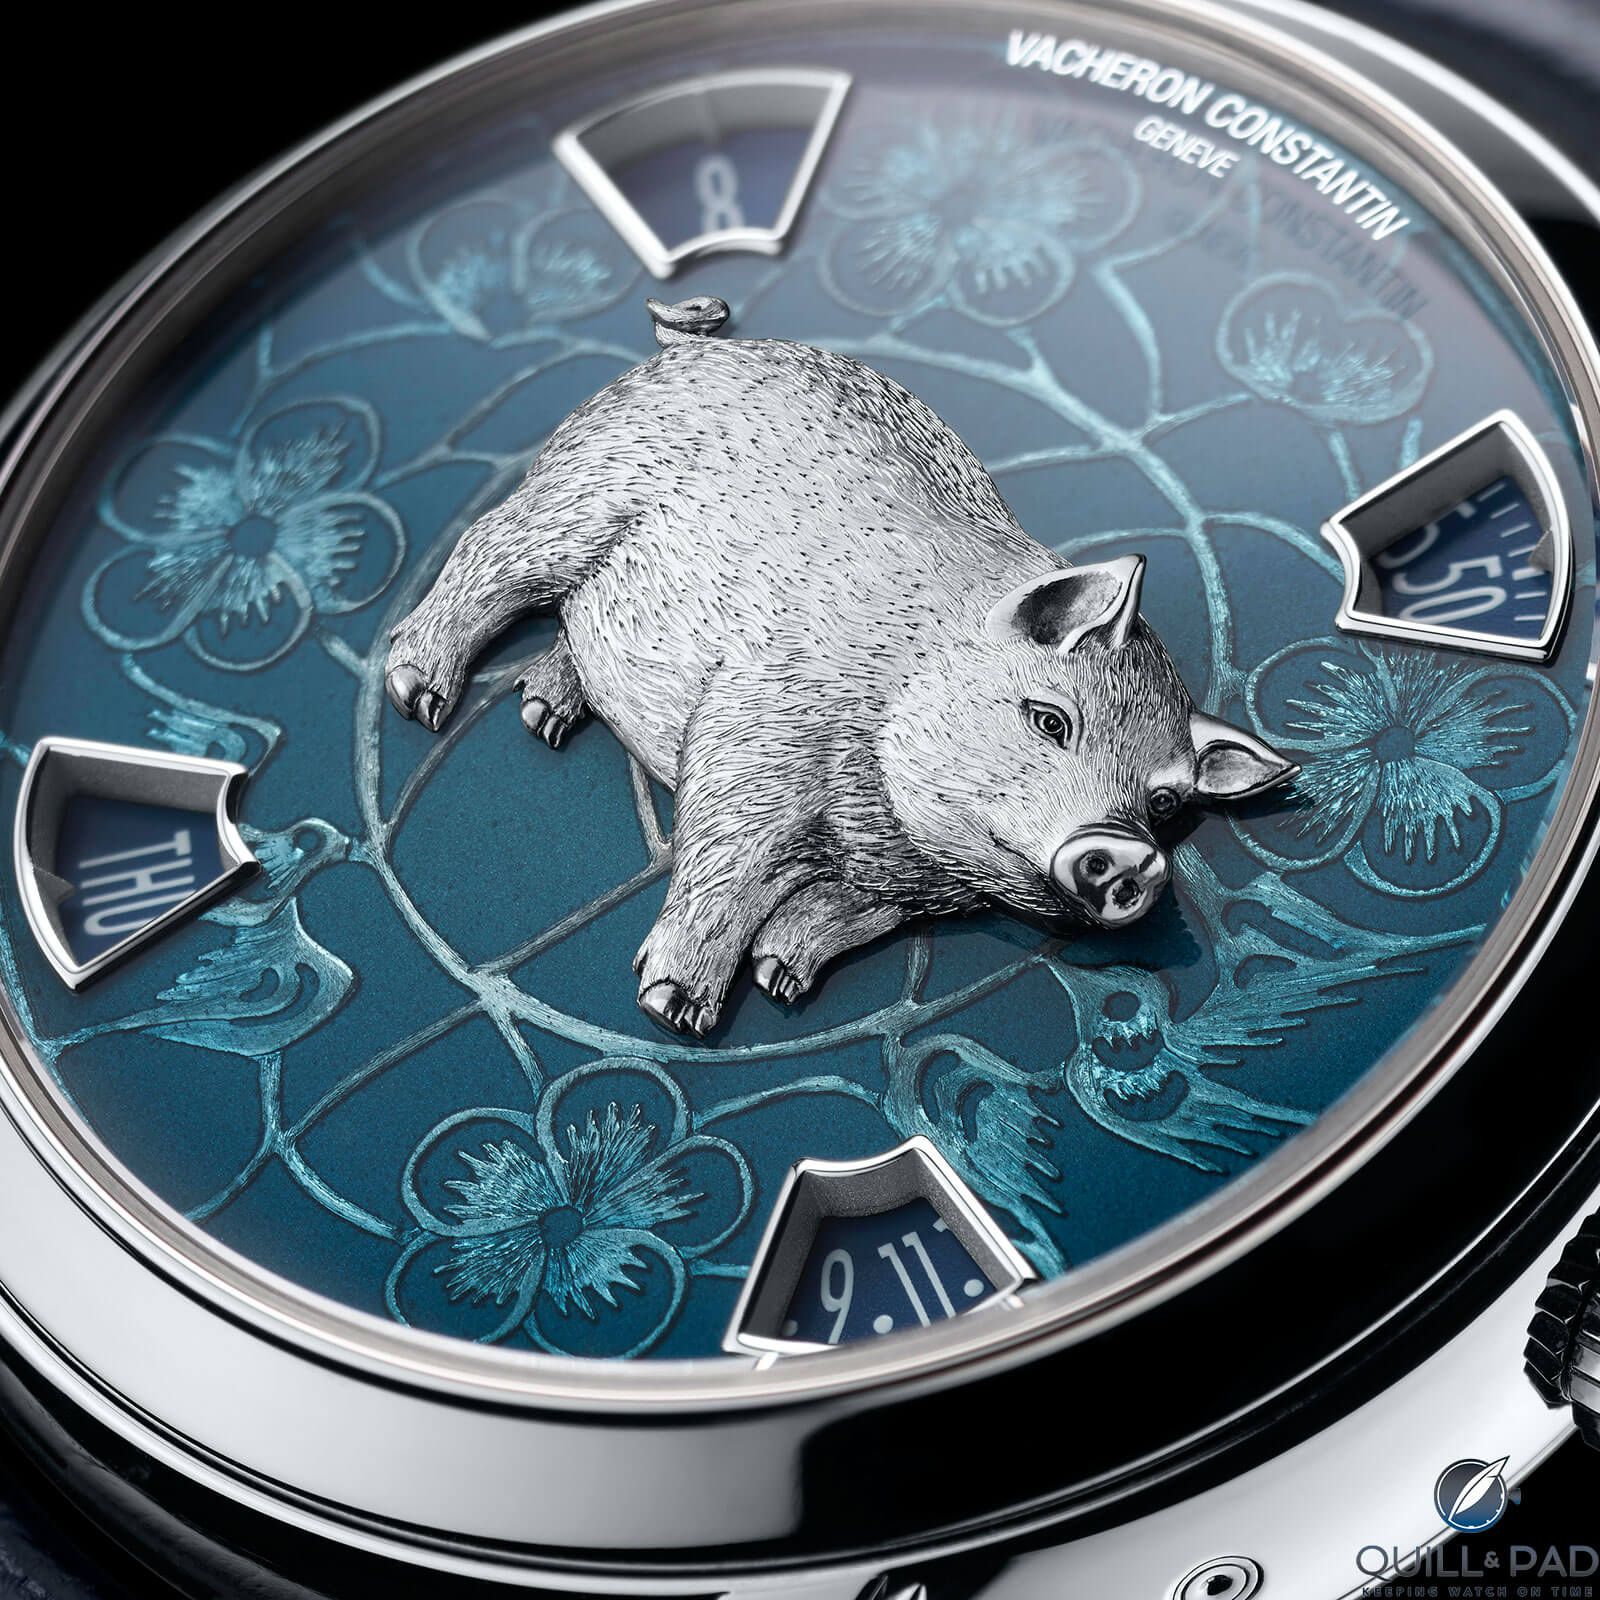 Vacheron Constantin Métiers d’Art Legend of the Chinese Zodiac Year of the Pig in platinium